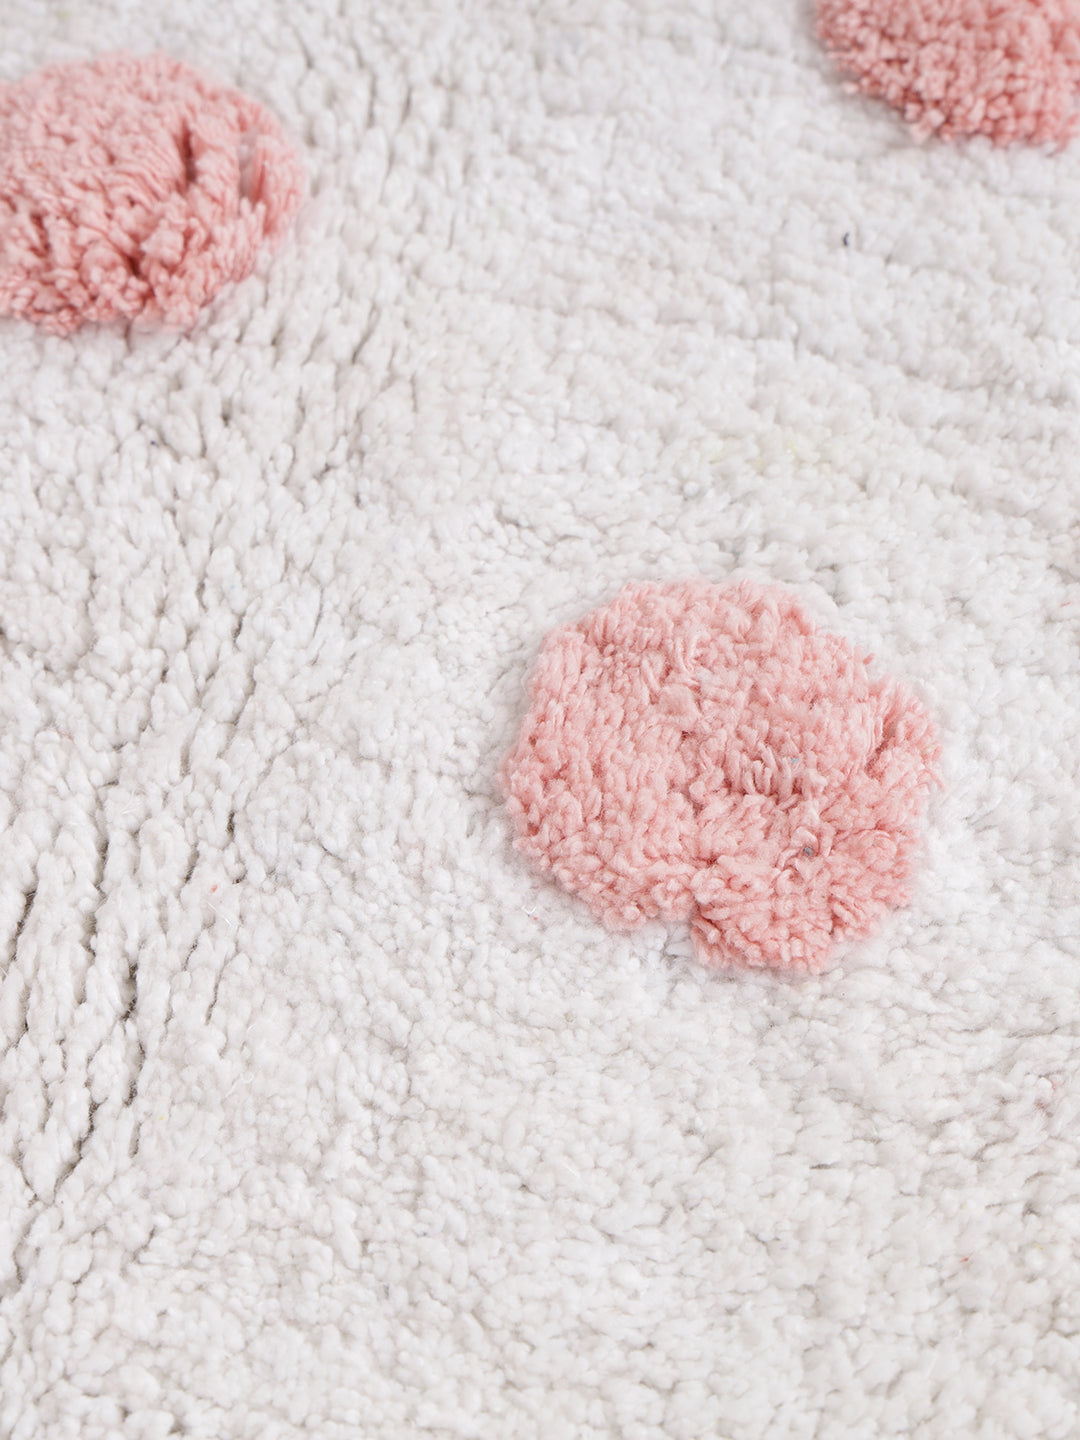 Pink and white Tufted Cotton Bath Mat